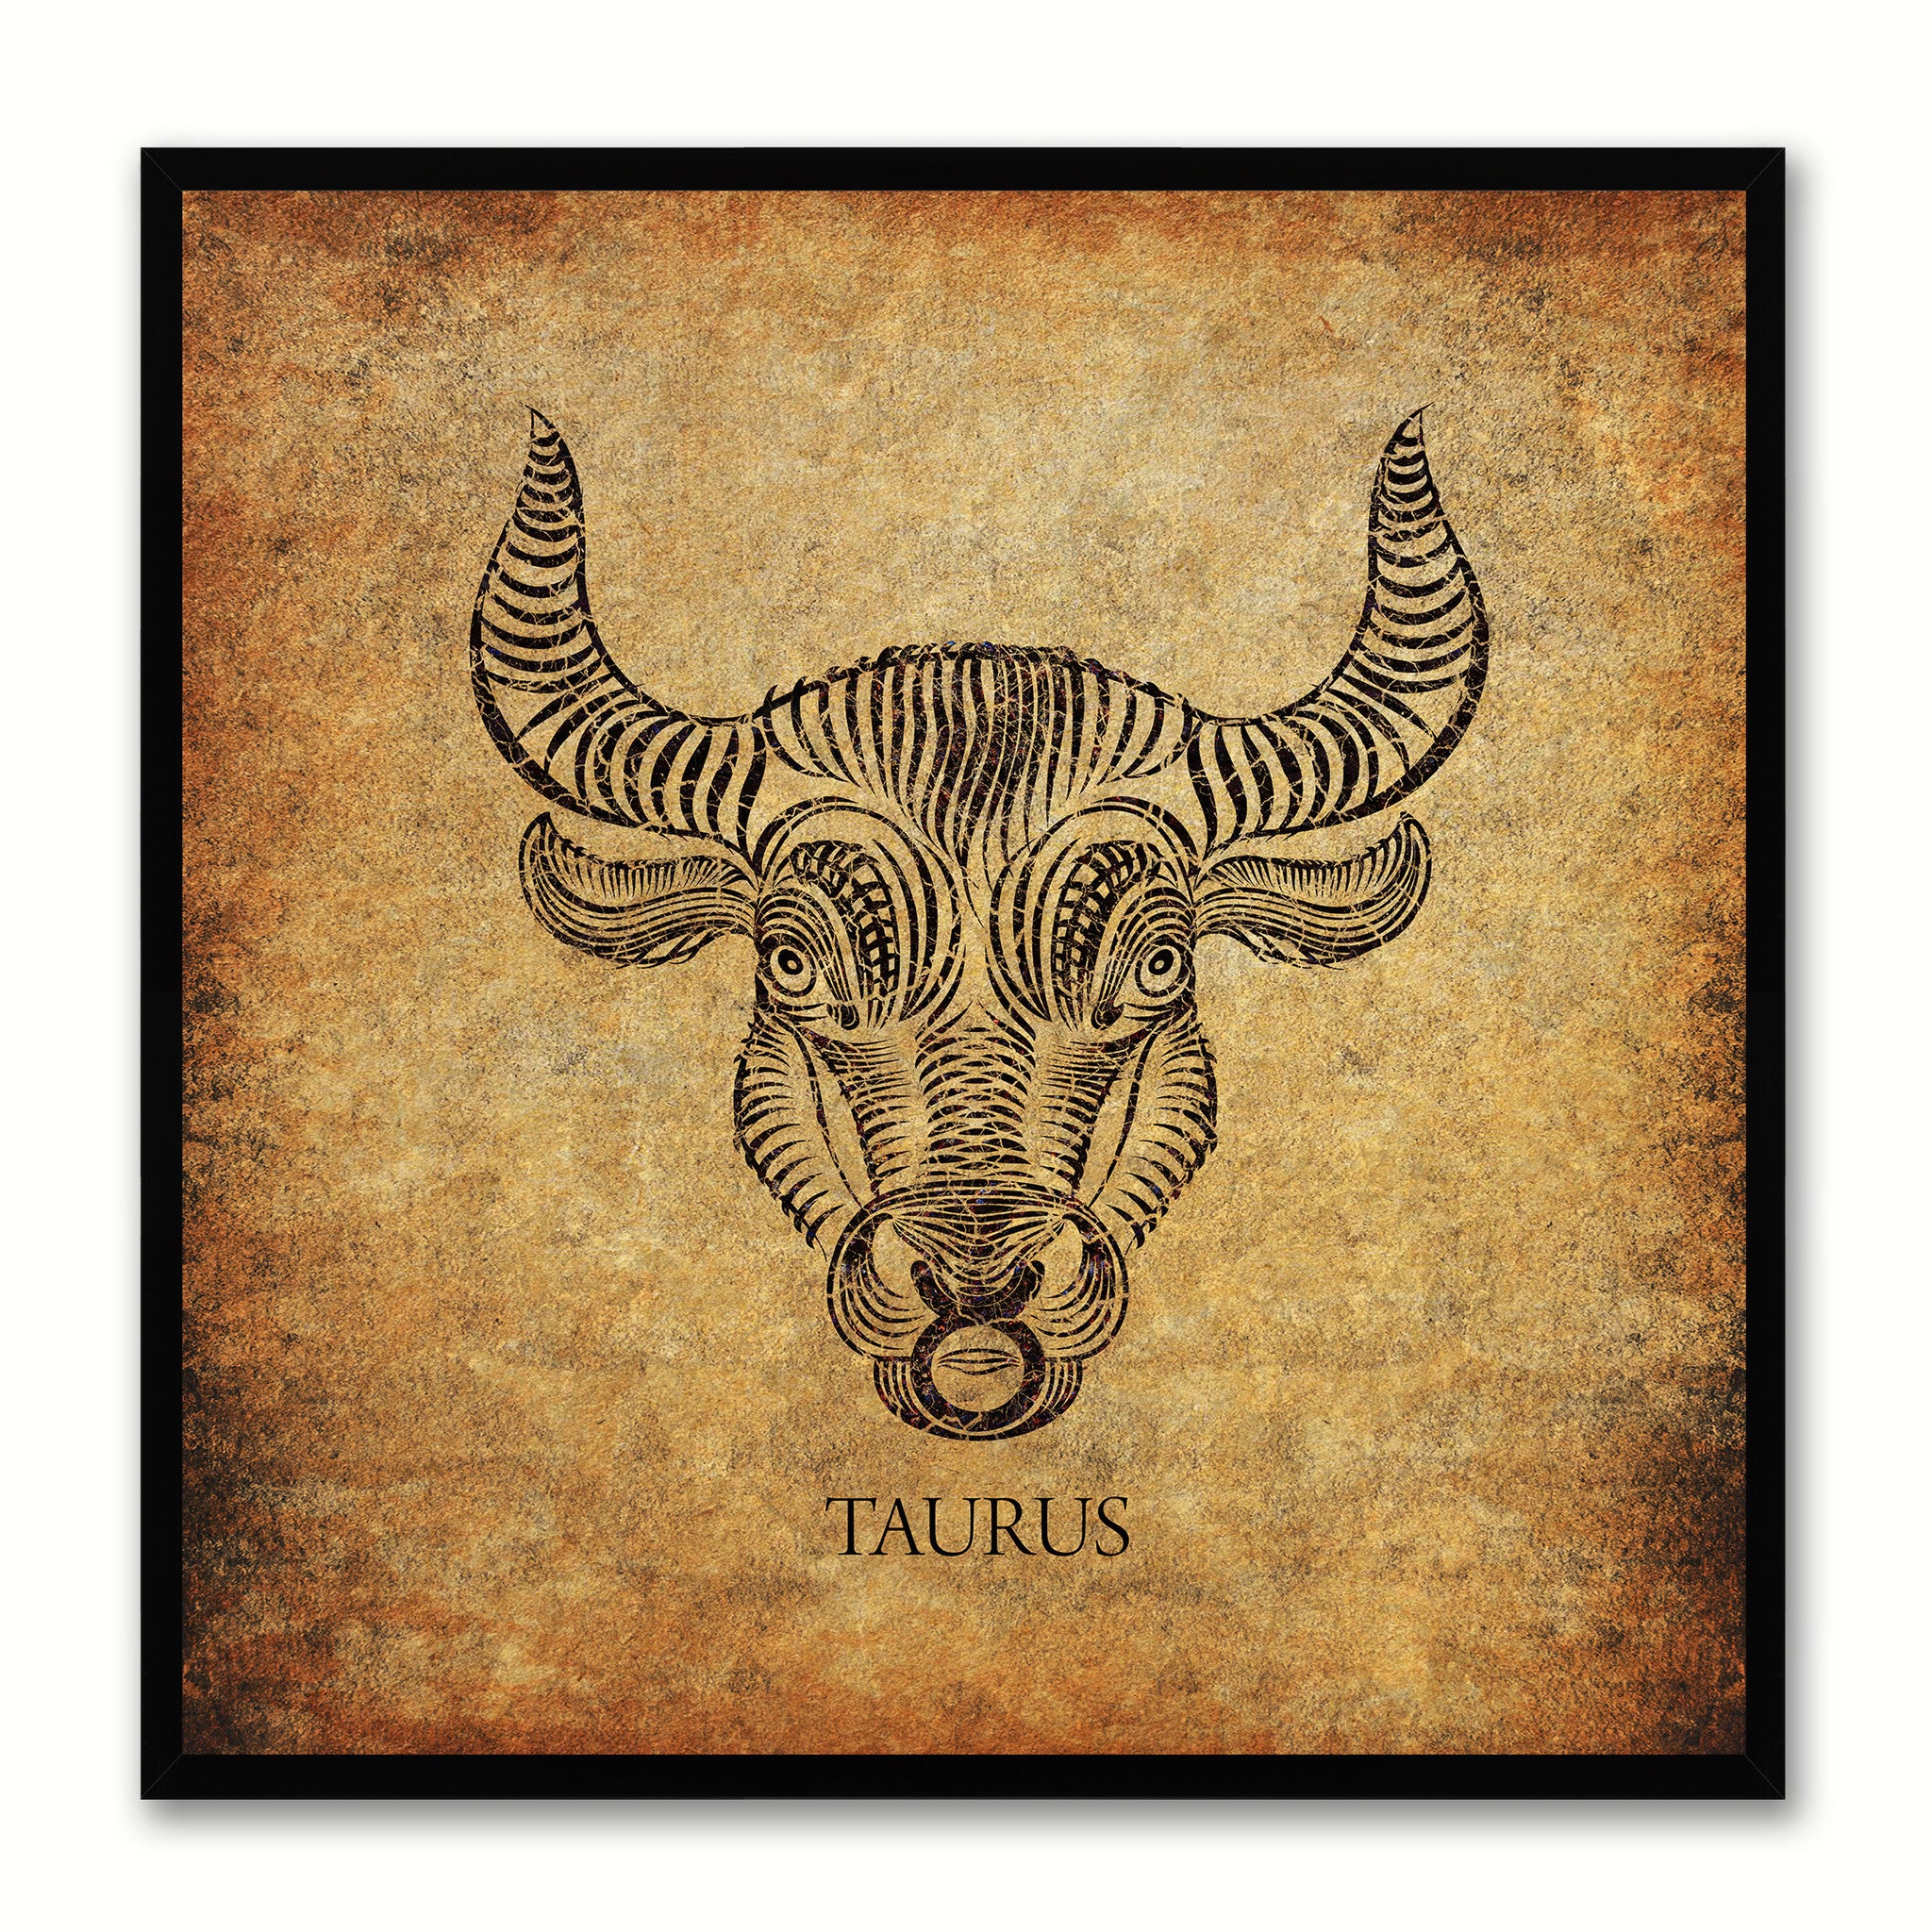 Zodiac Taurus Horoscope Brown Canvas Print, Black Picture Frame Gifts Home Decor Wall Art Decoration